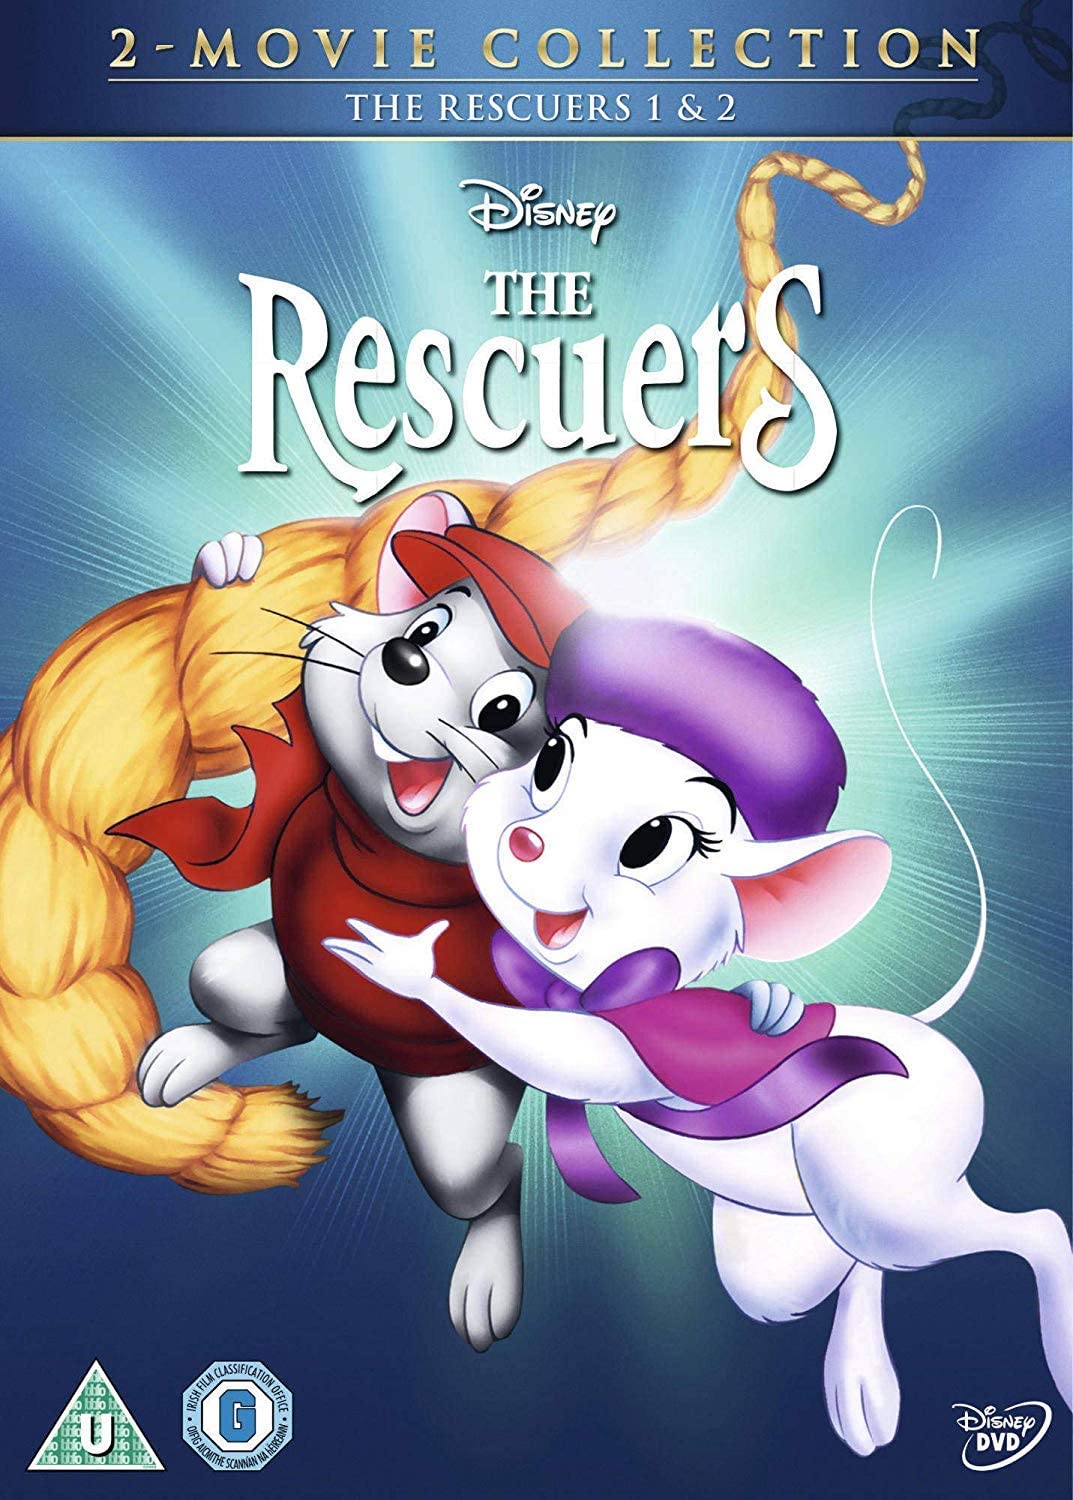 Rescuers and Rescuers Down Under Doublepack [2018] - Animation [DVD]